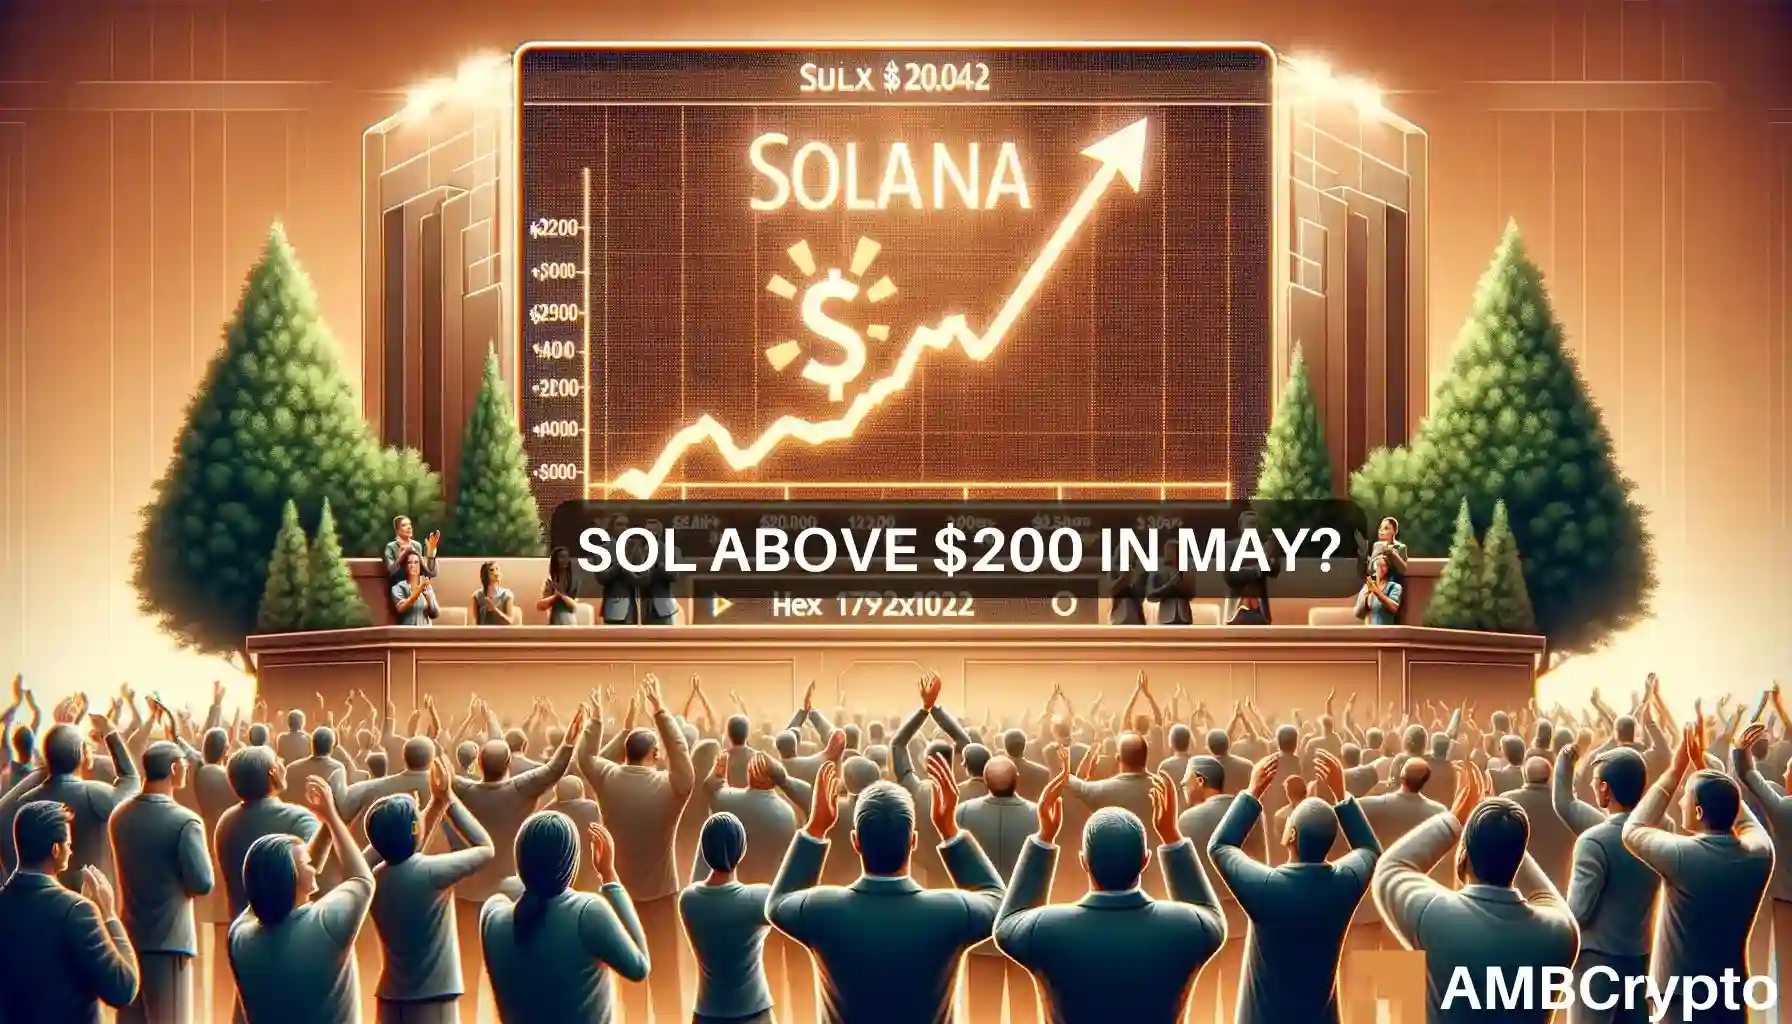 Solana eyes $200 price target - Here's what SOL needs to do now